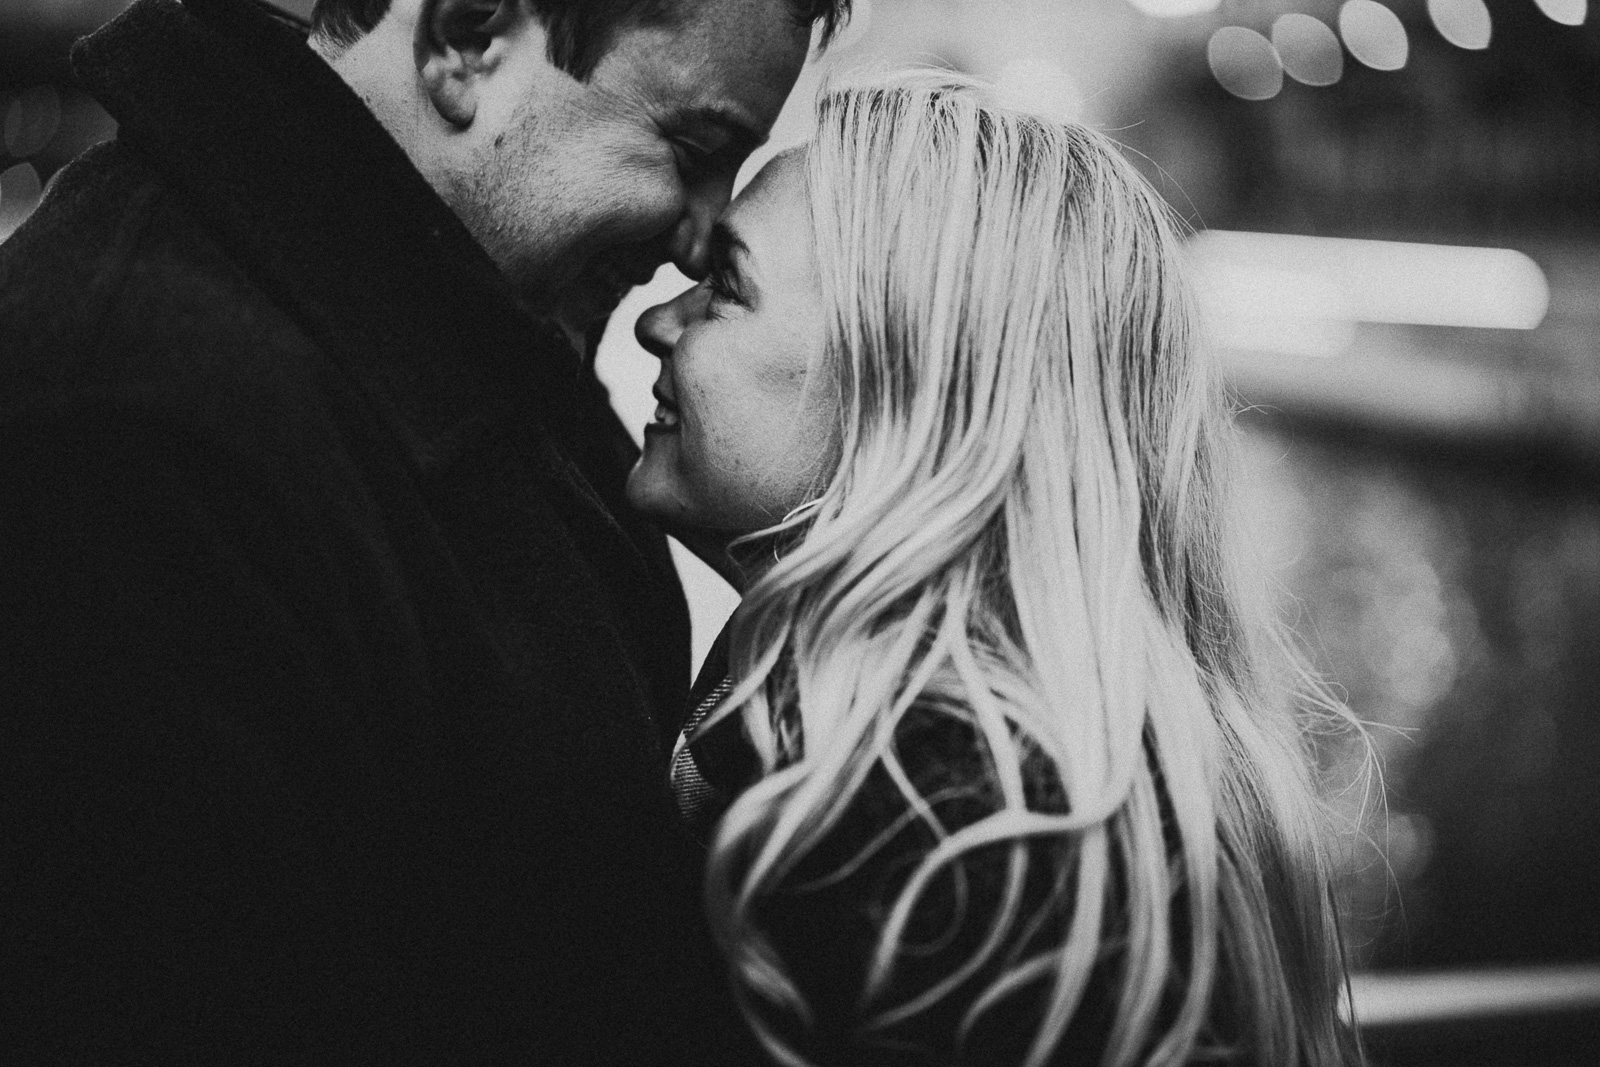 11 engagement photos in black and white - Zach + Staci // Chicago Proposal